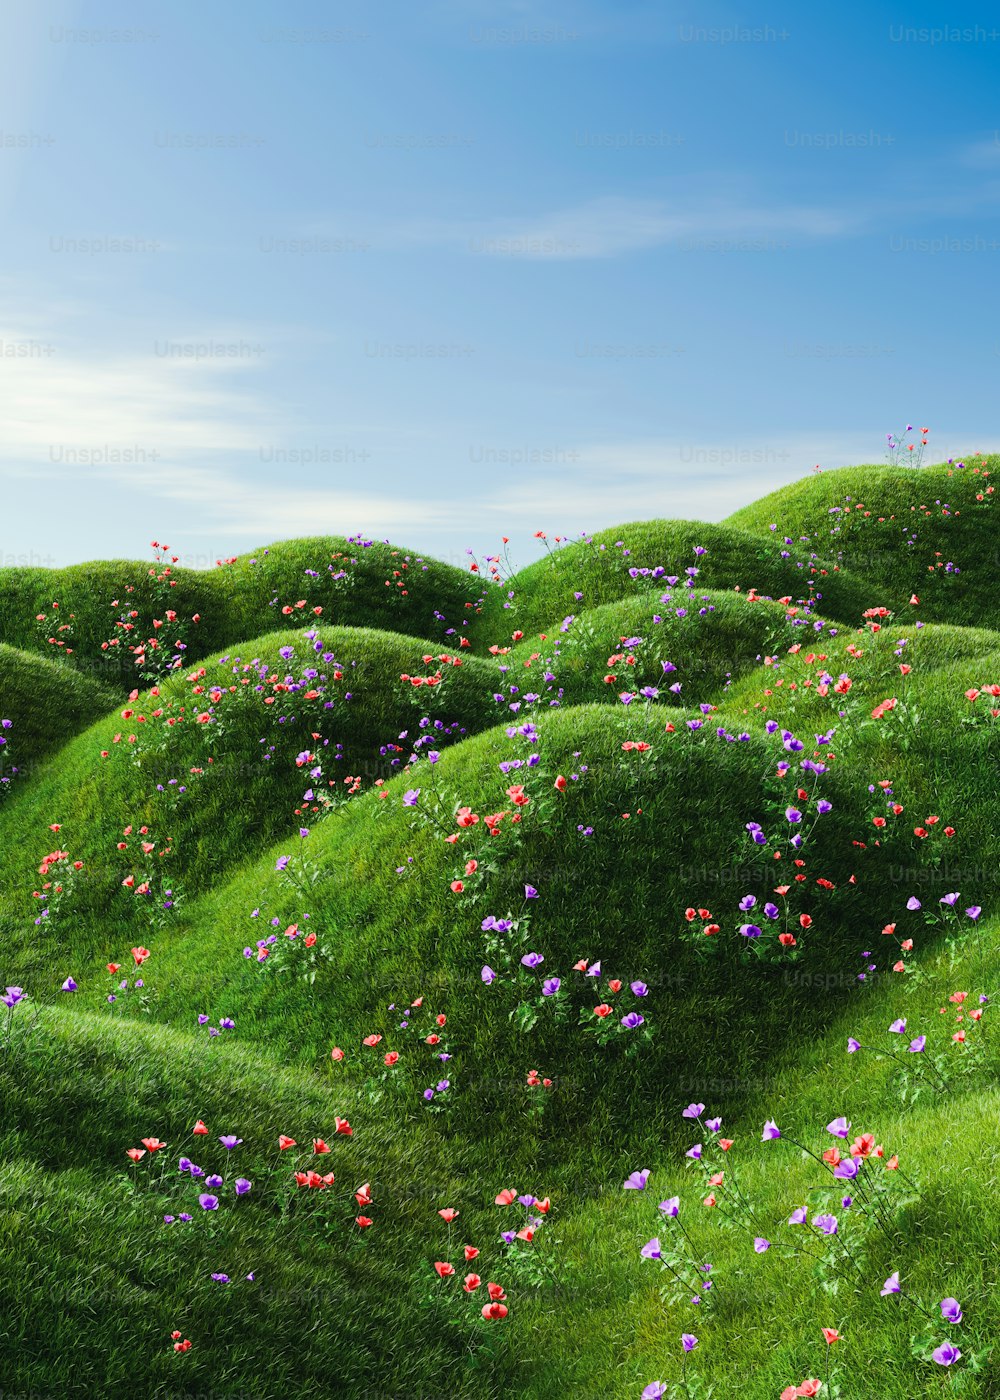 a grassy hill with flowers growing on it